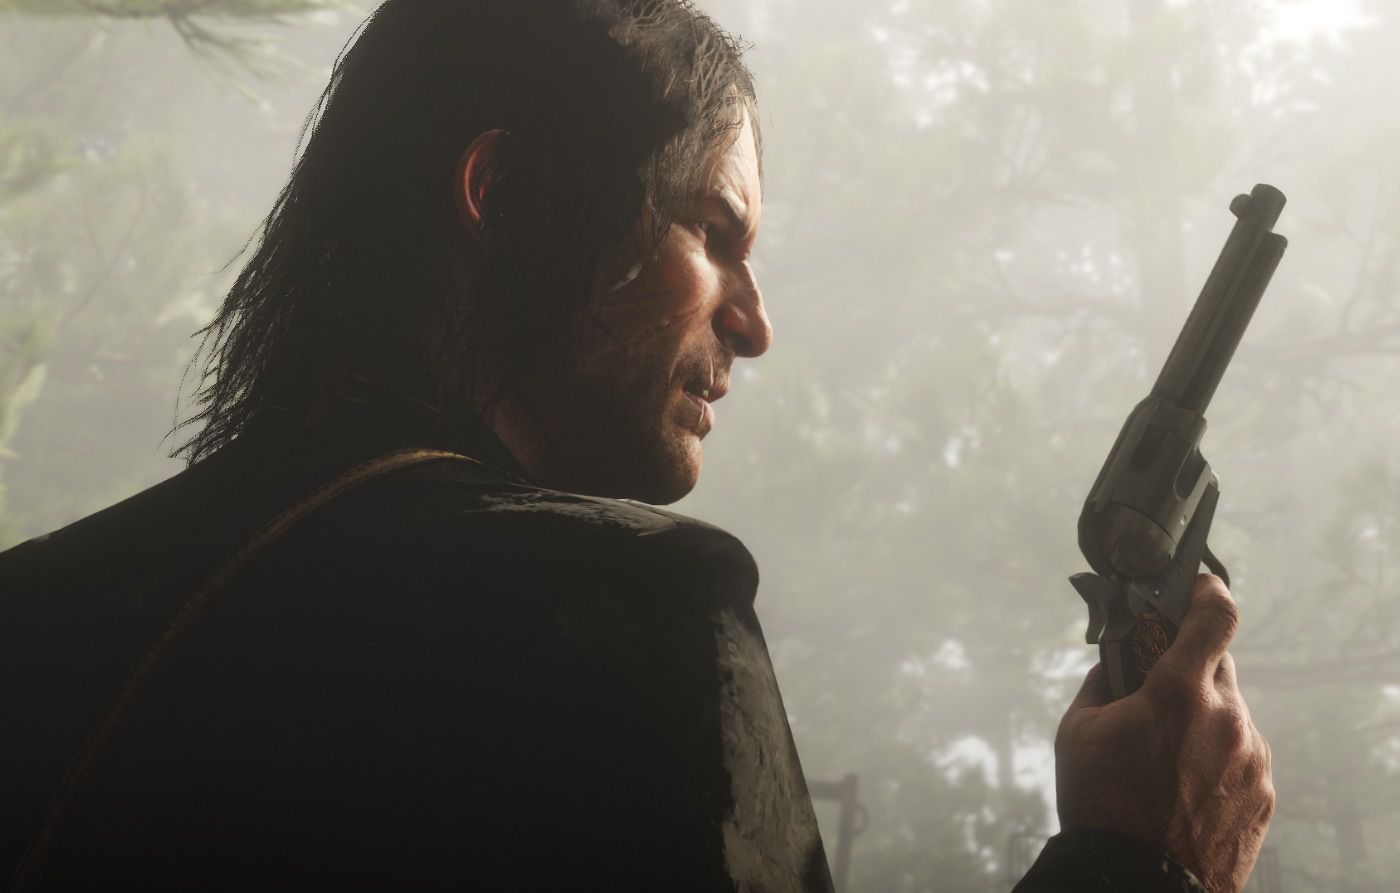 Red Dead Redemption 2 fans' hunt for the real John Marston - Polygon